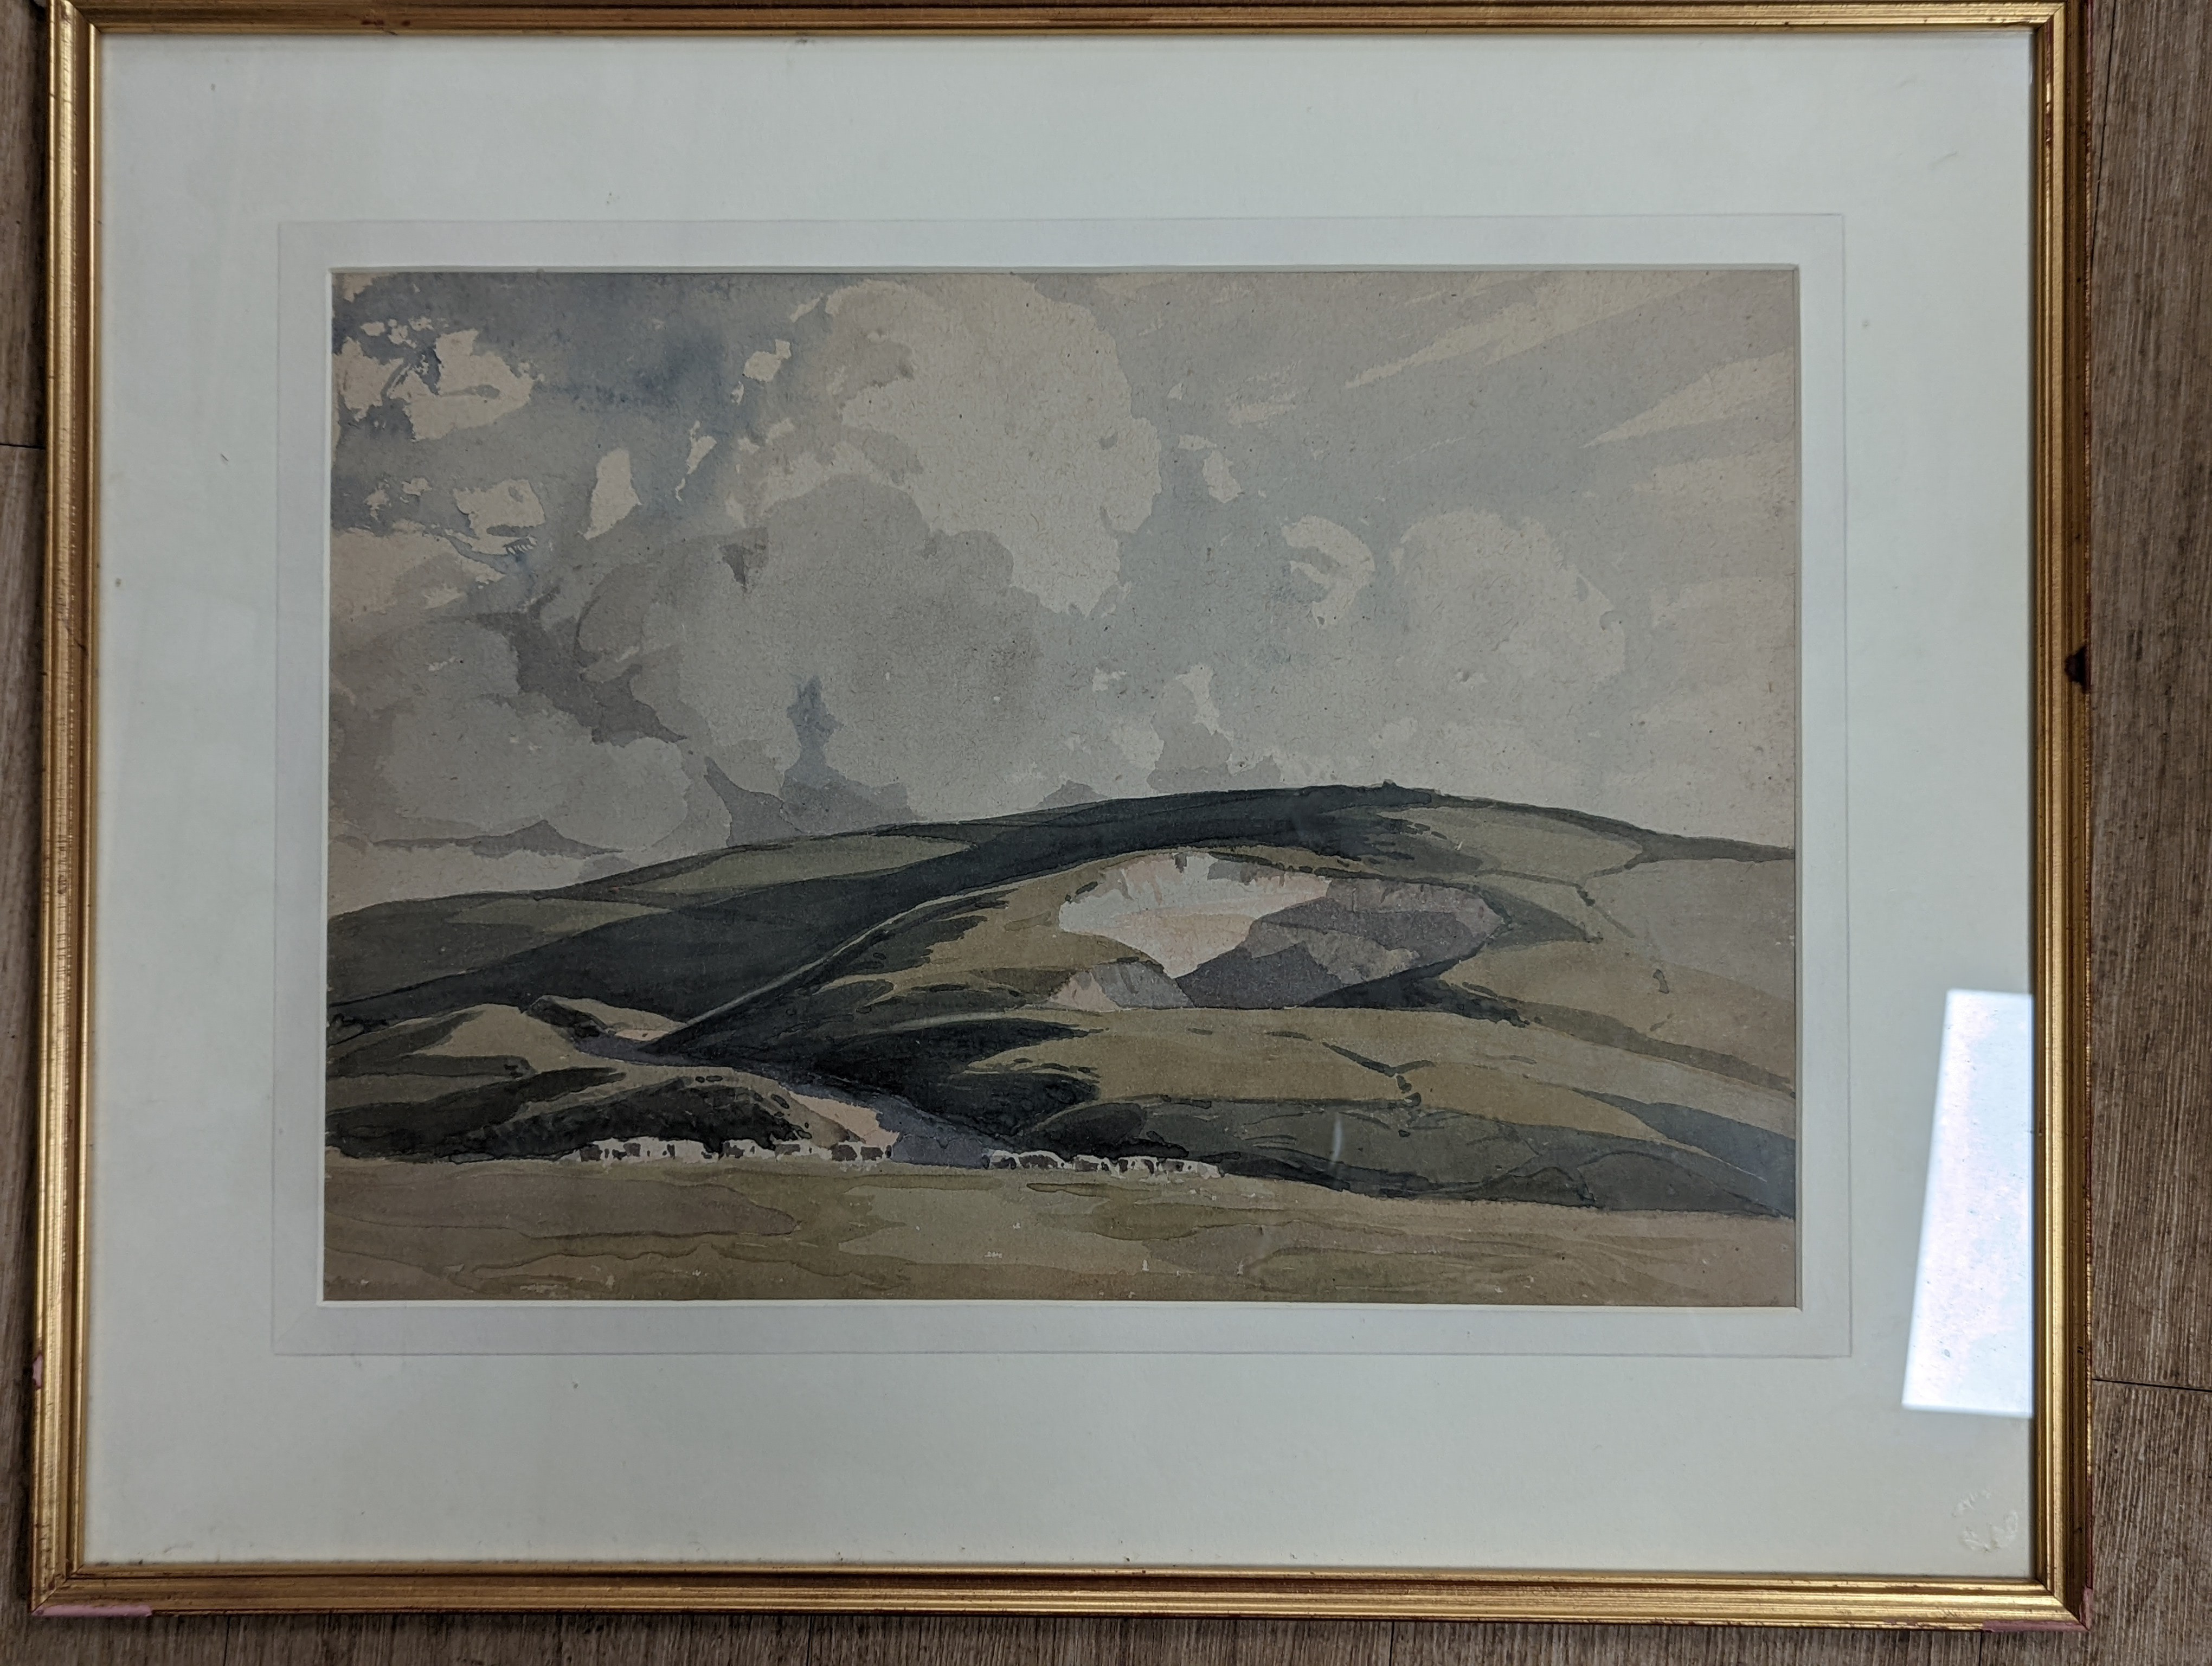 Walter Robert Stewart Acton (1879-1960), five watercolours, Views along the South Downs, largest 32 x 45cm